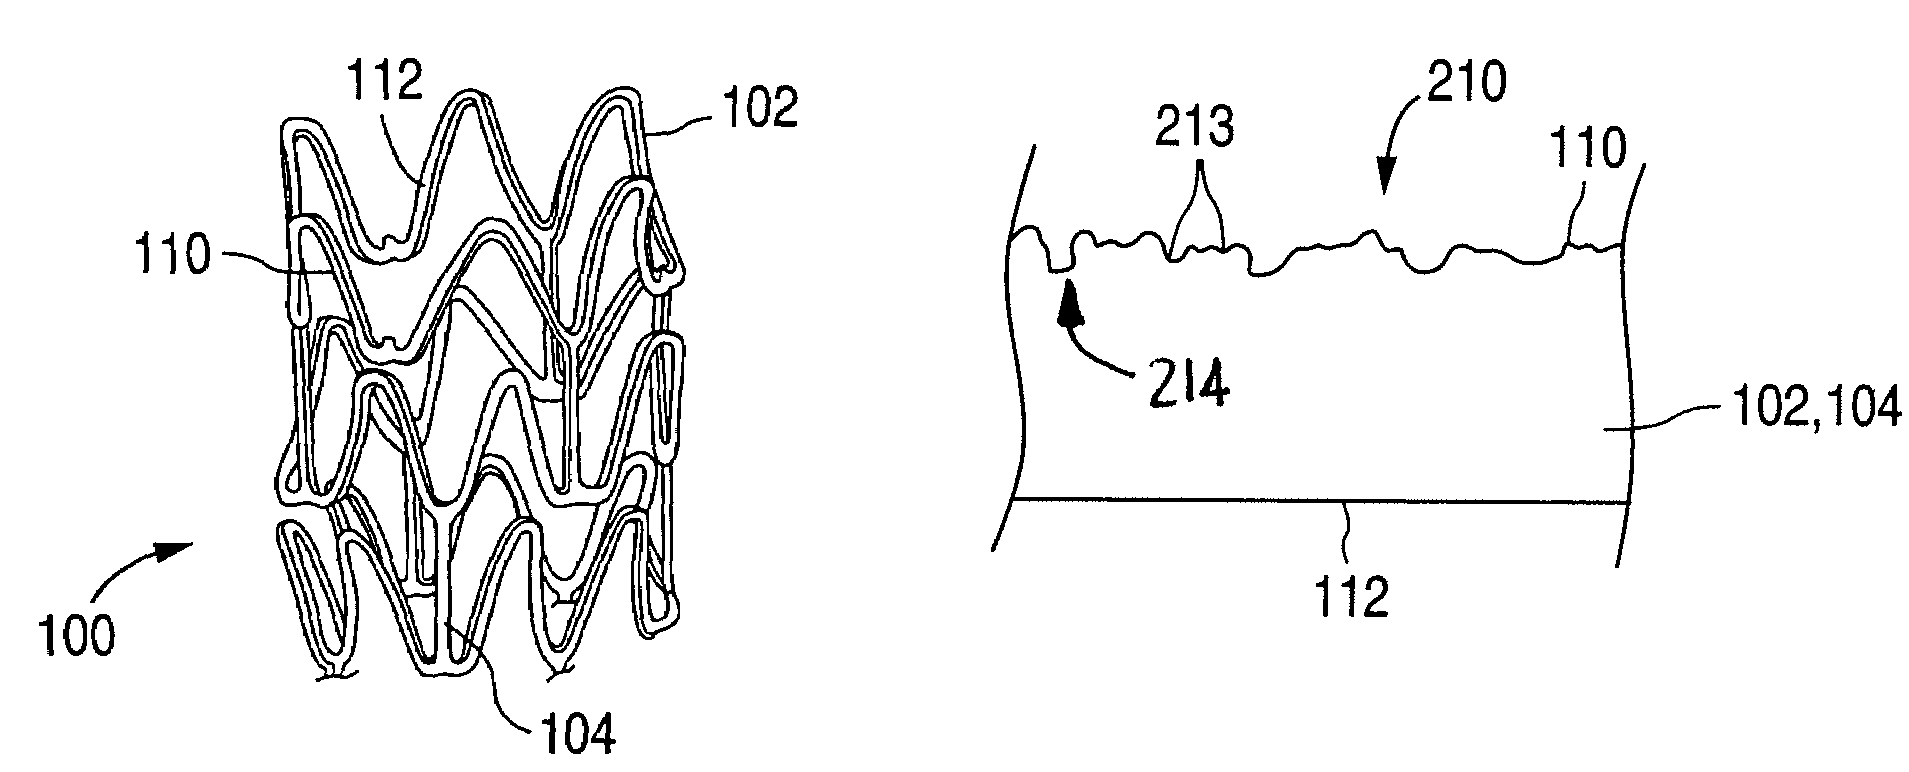 Method and system for creating a textured surface on an implantable medical device